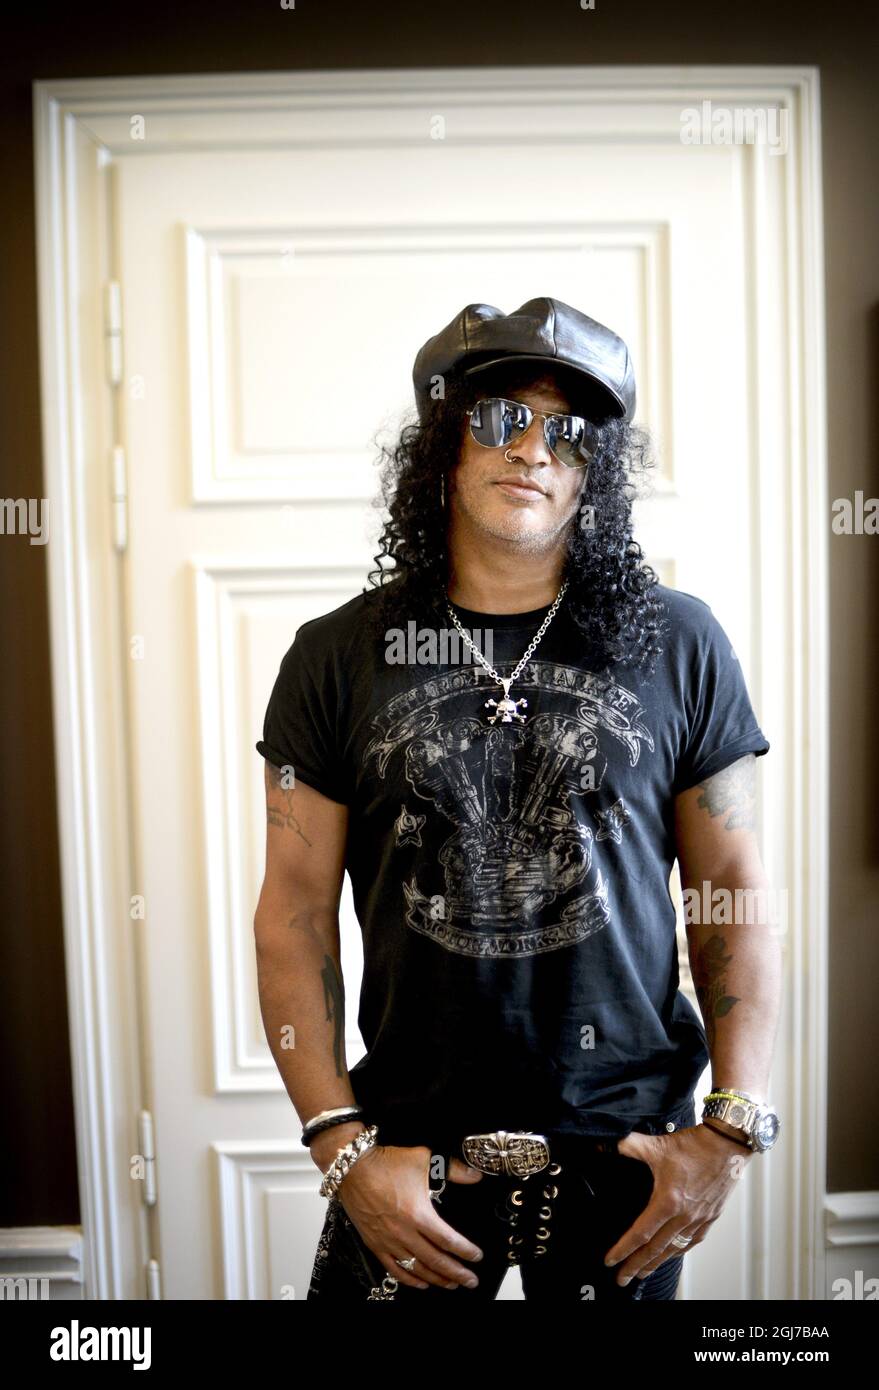 Slash Guns N Roses High Resolution Stock Photography and Images - Alamy